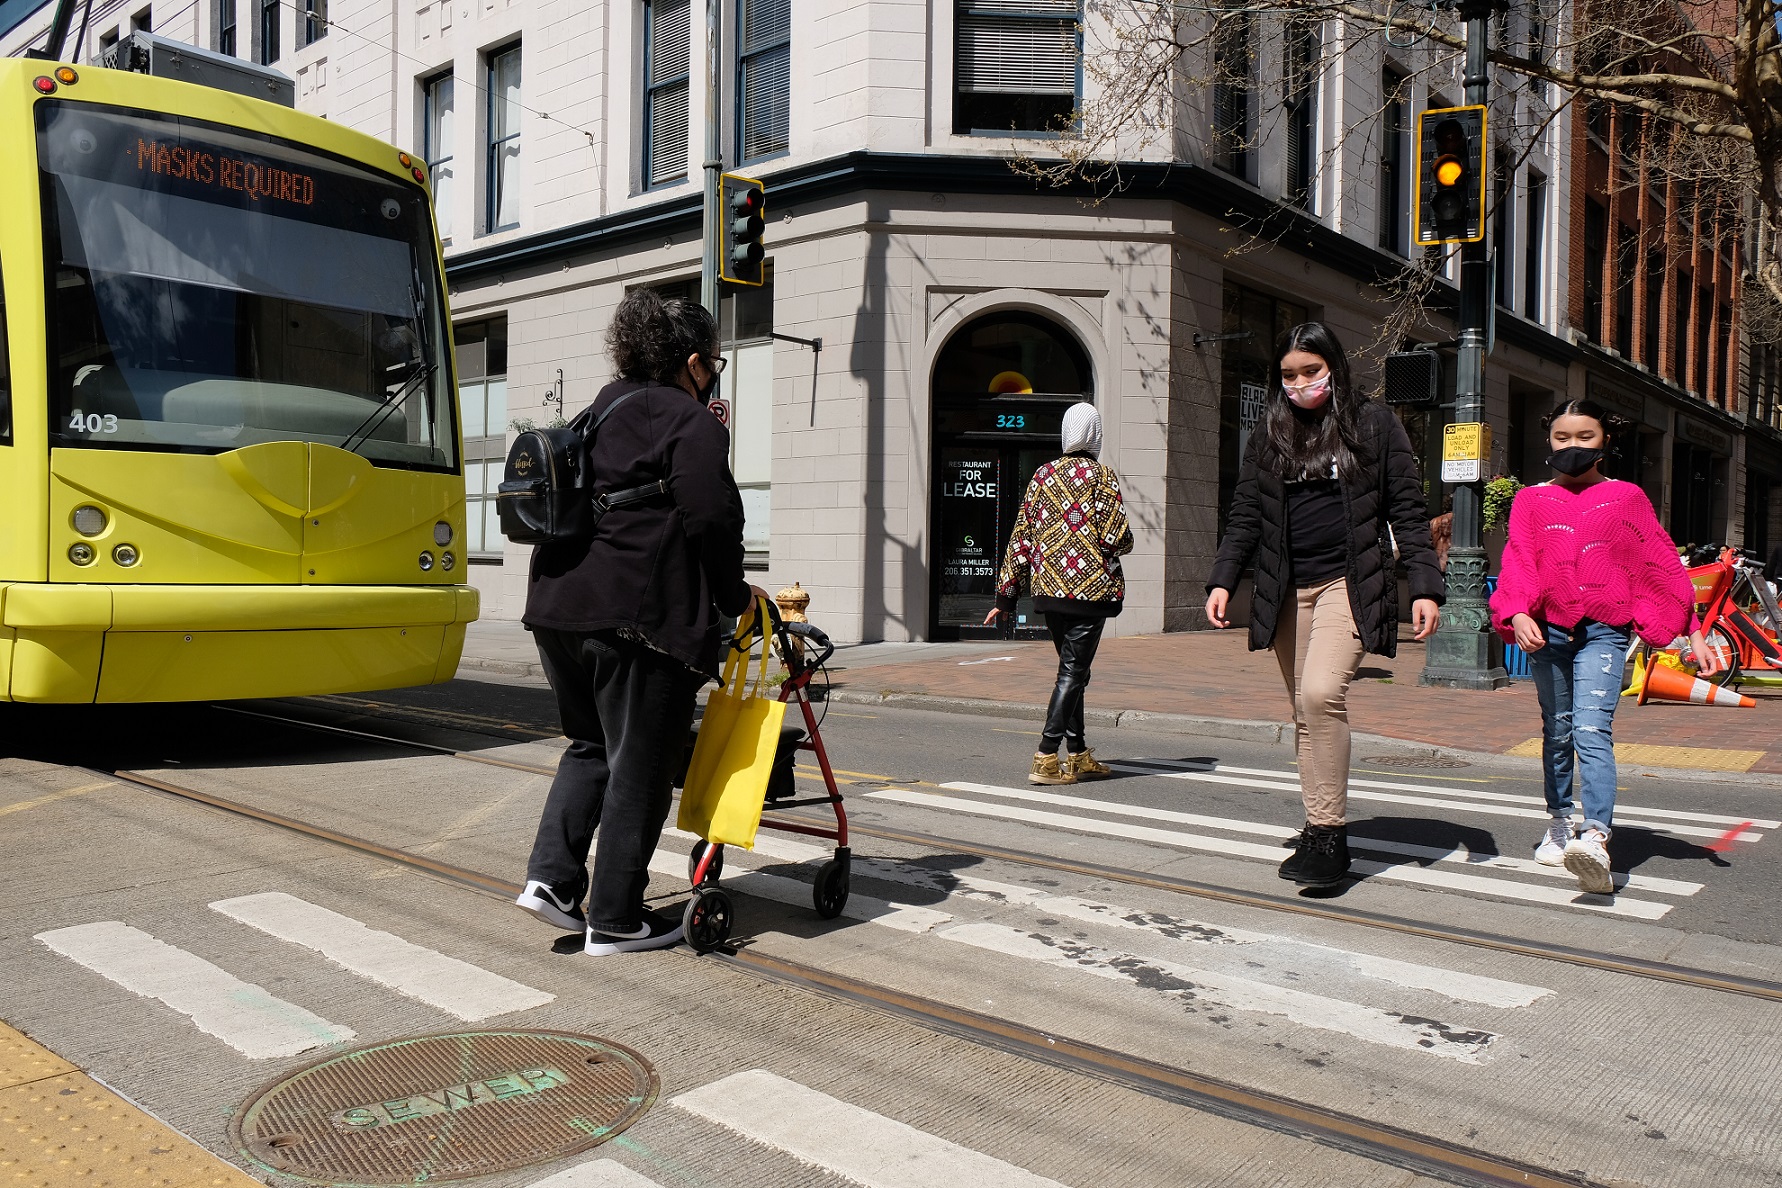 People walk across the street in Seattle’s Pioneer Square neighborhood. The Seattle Streetcar is visible to the left.